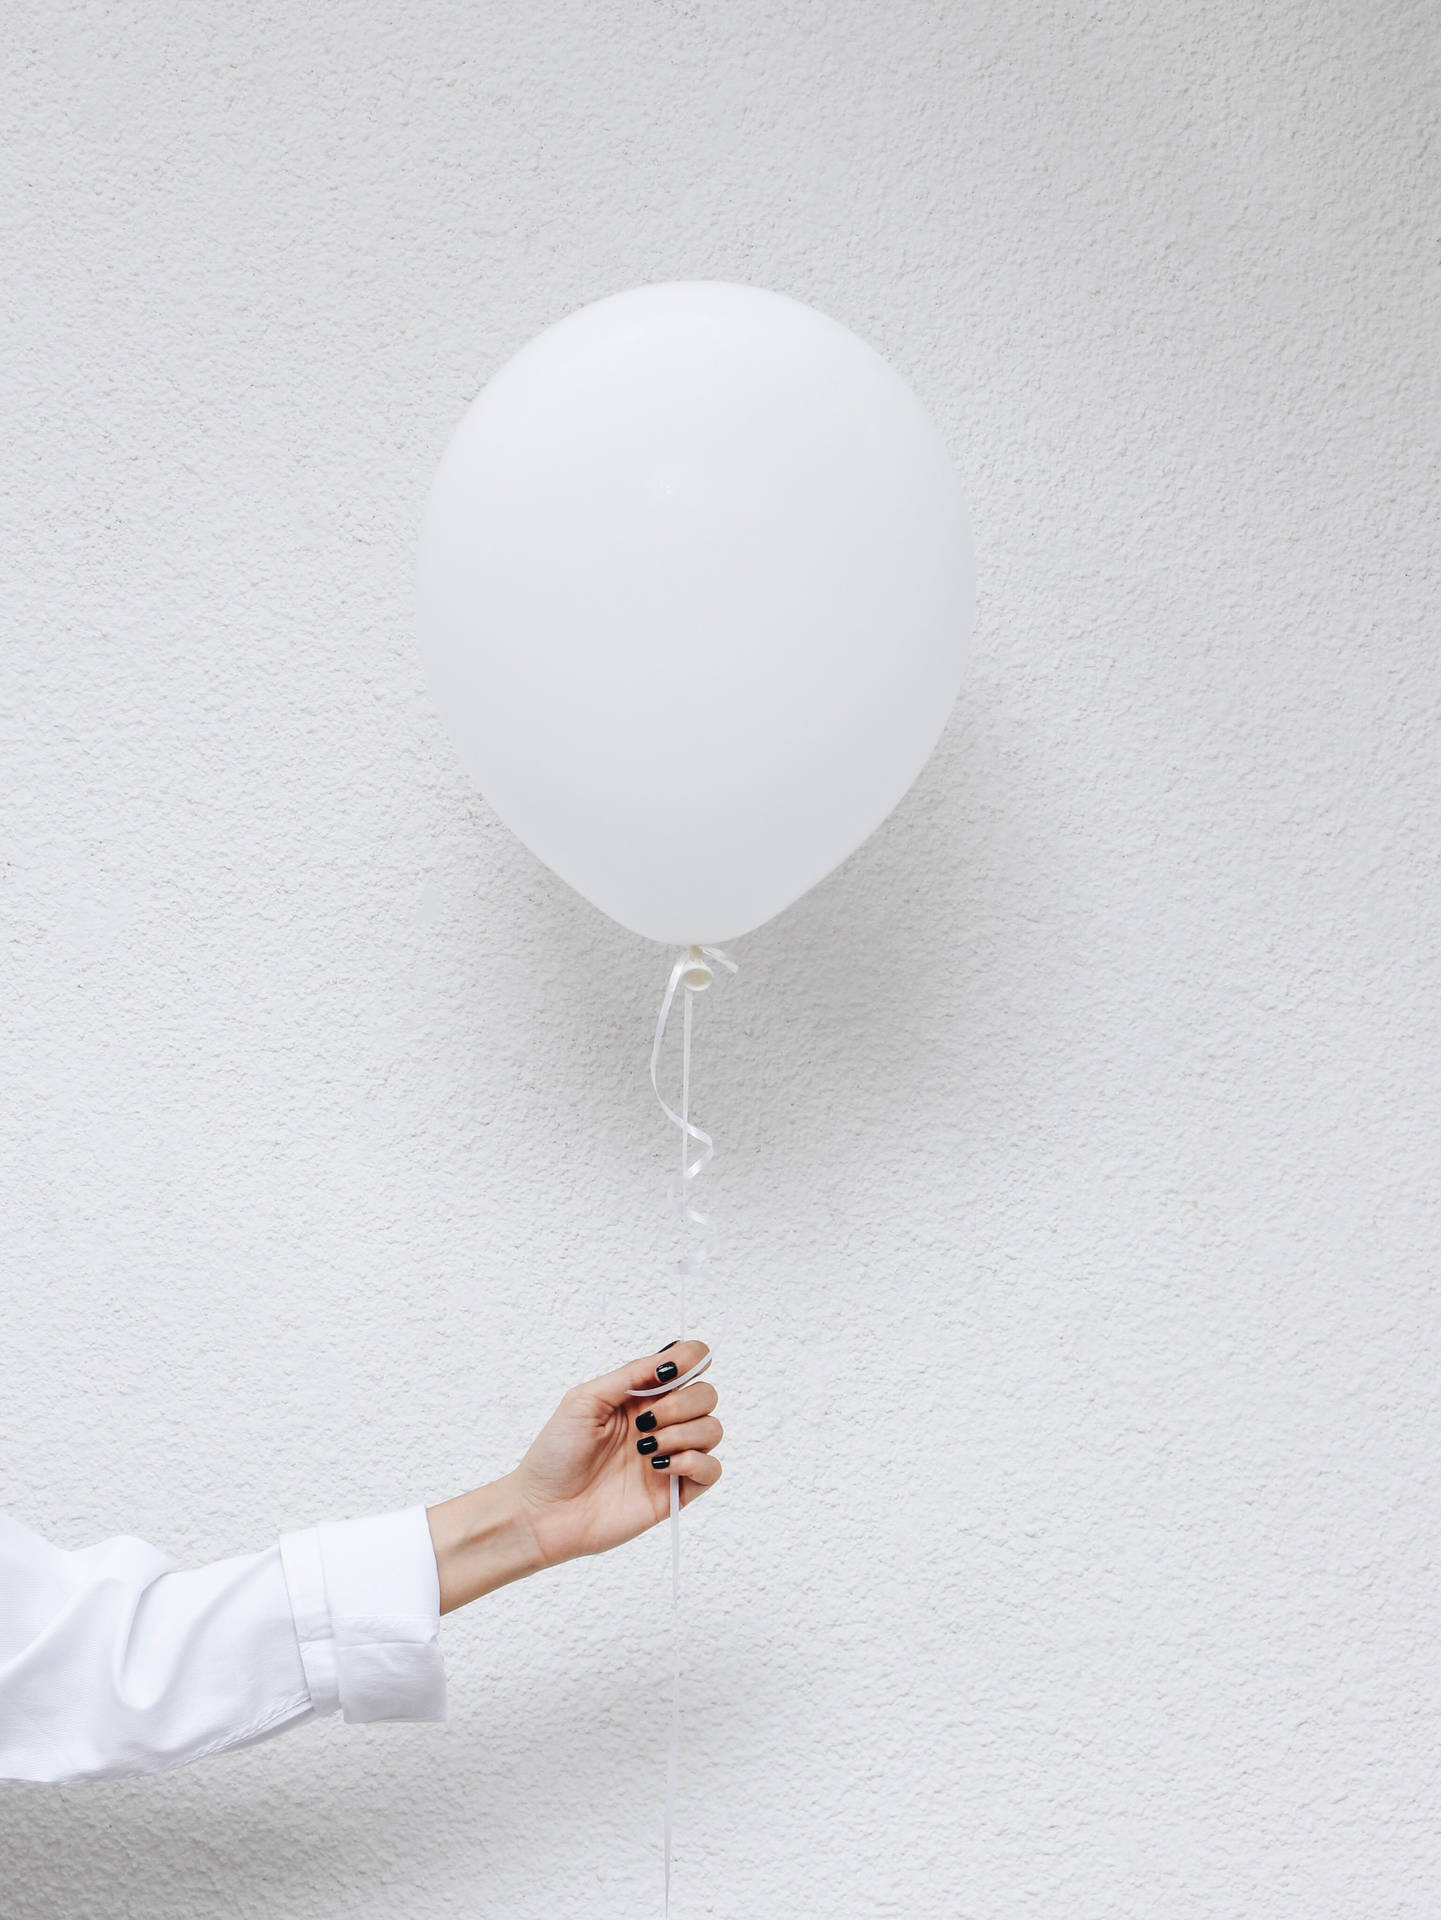 Download Balloon In White Aesthetic Wallpaper